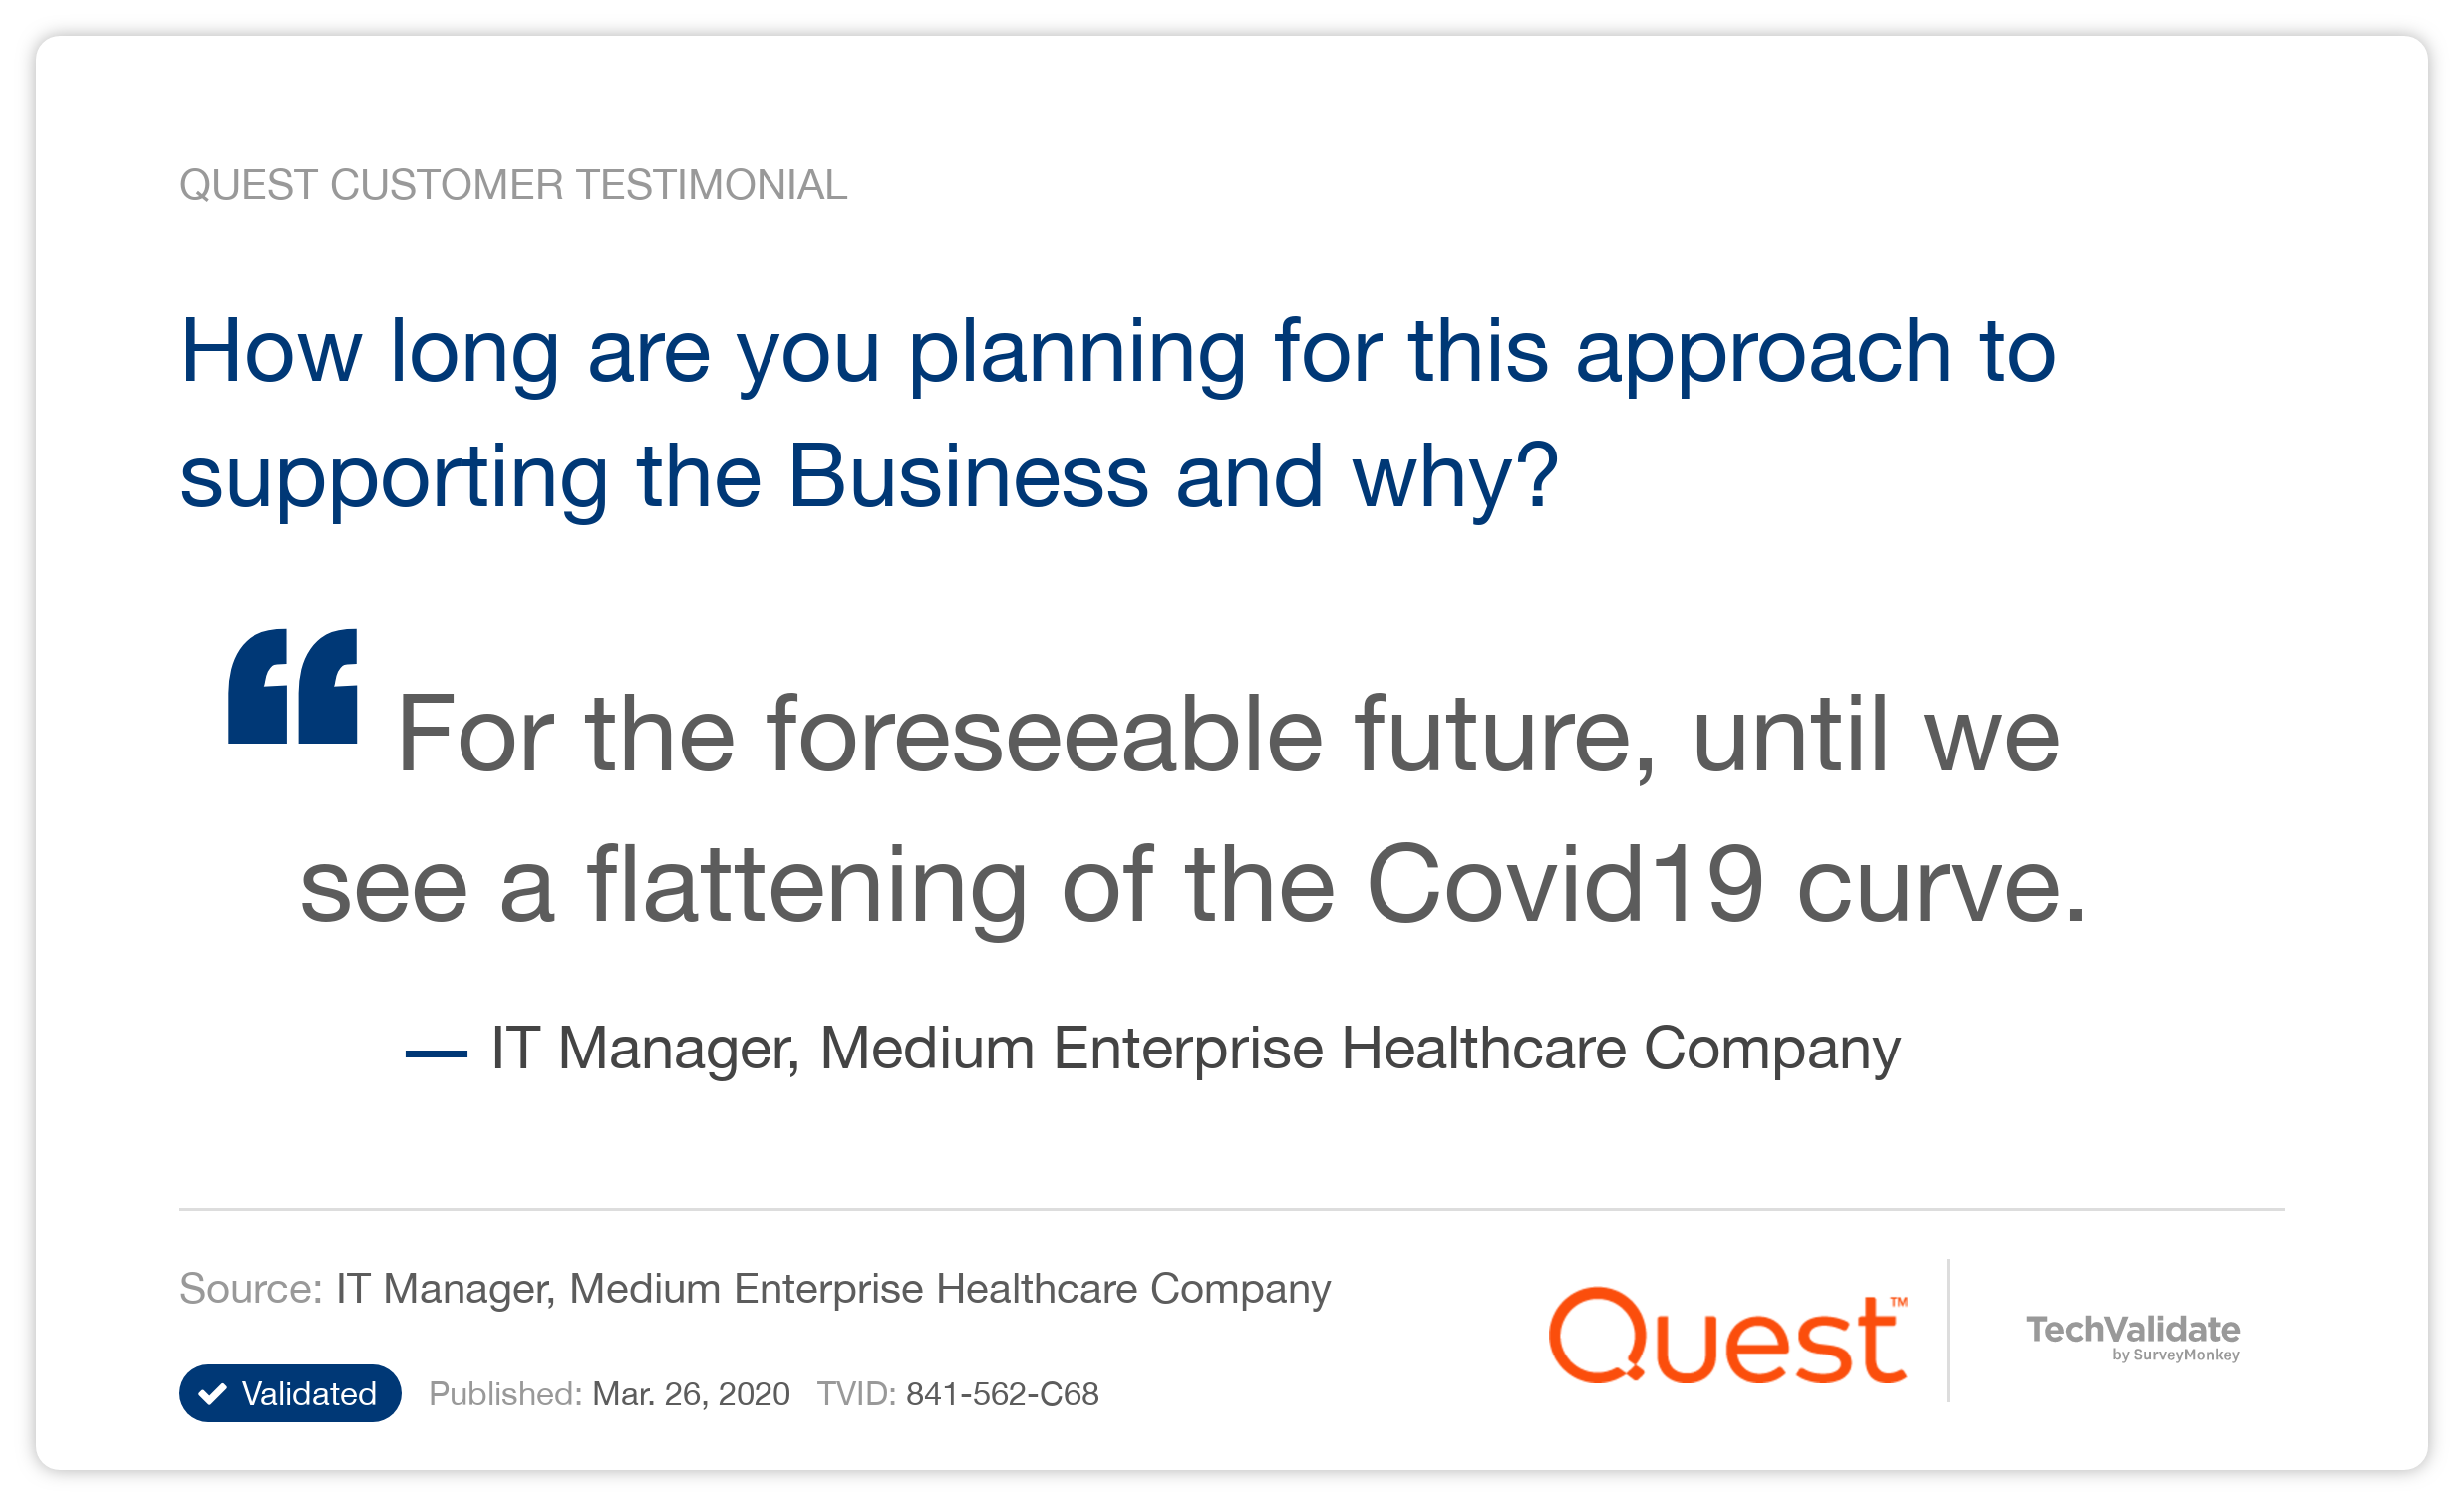 How long are you planning for this approach to supporting the Business and why?